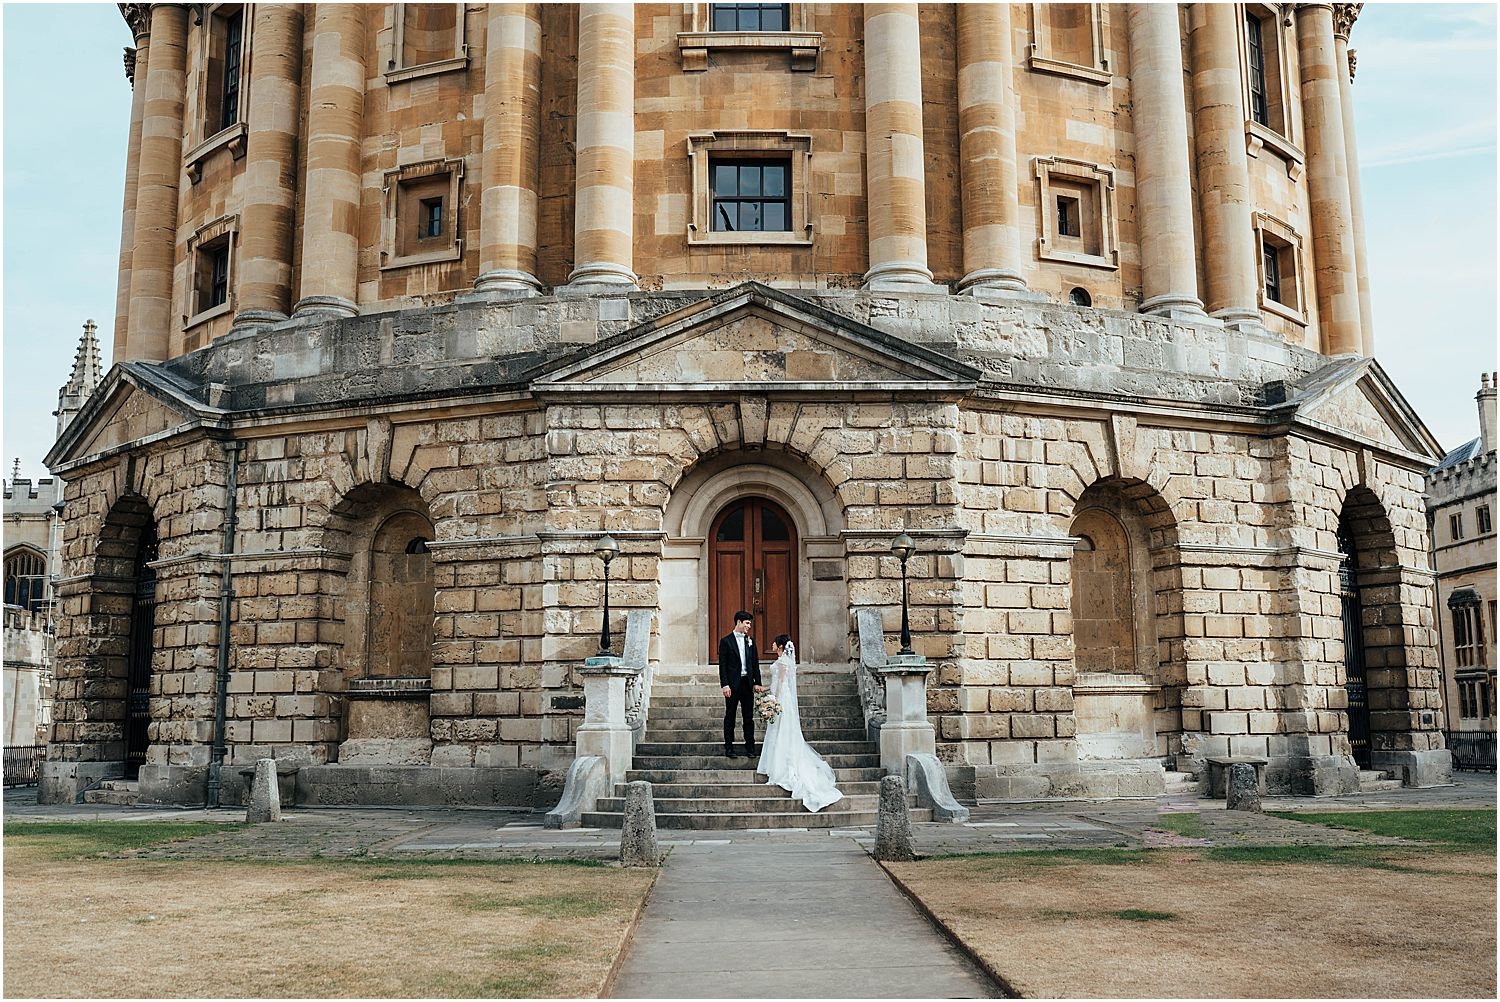 Wedding photo in Radcliffe Square Oxford